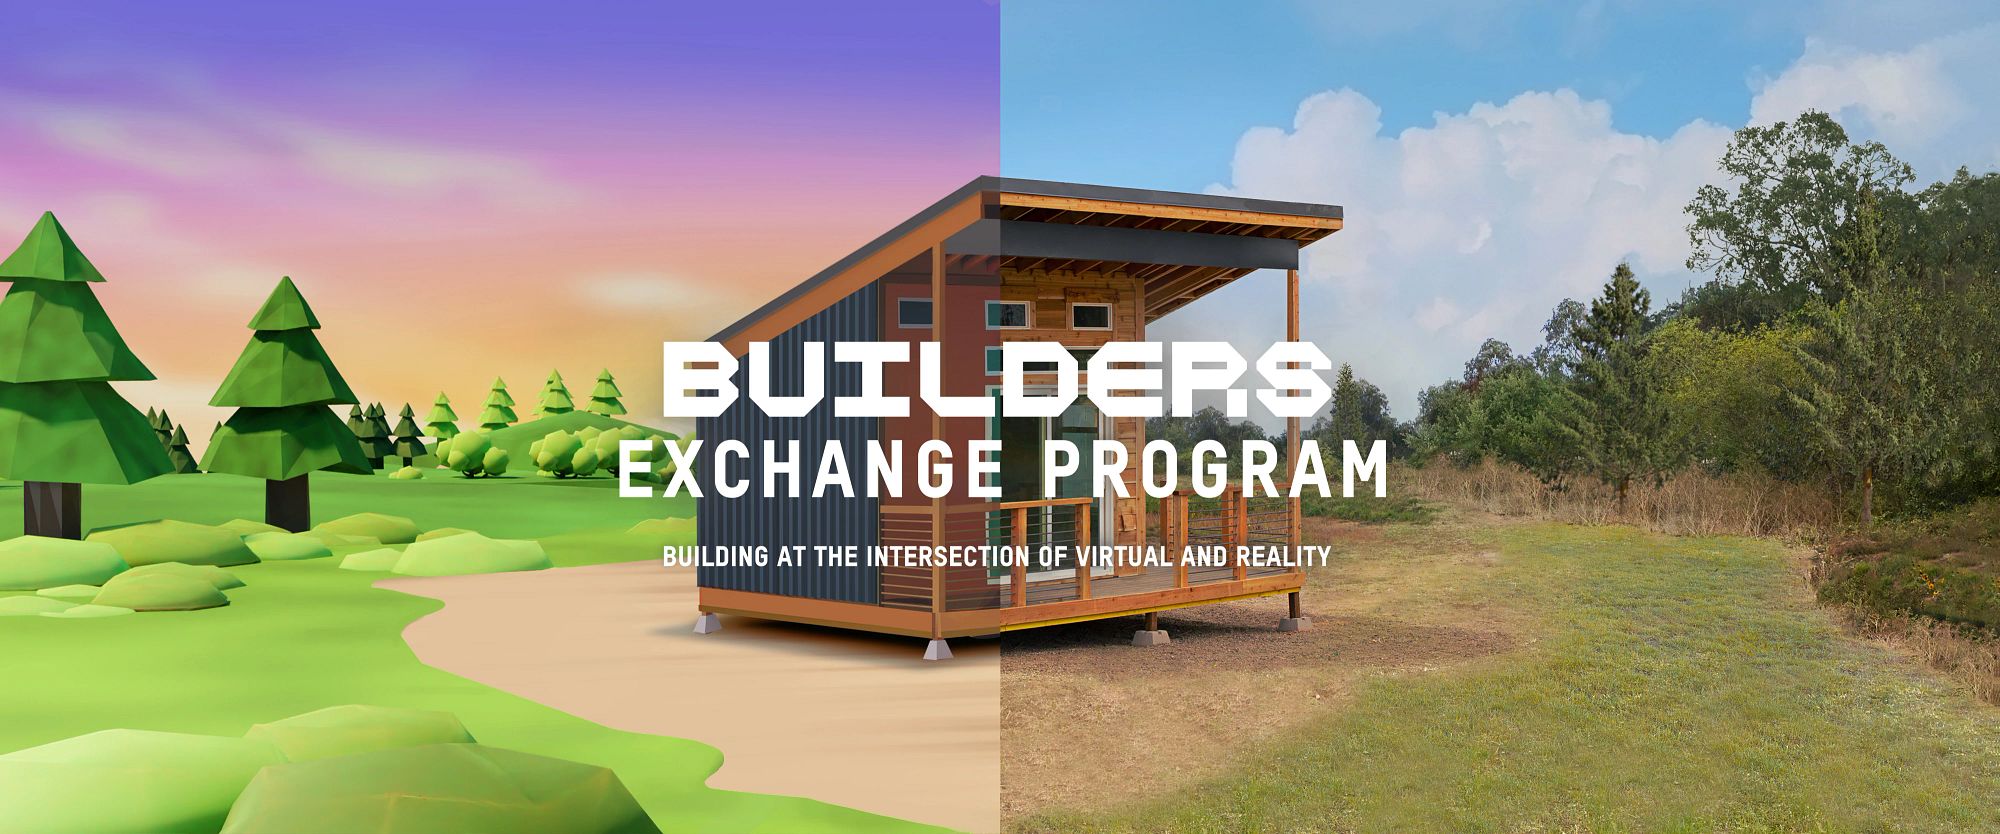 Builders Exchange Program - Building at the intersection of virtual and reality